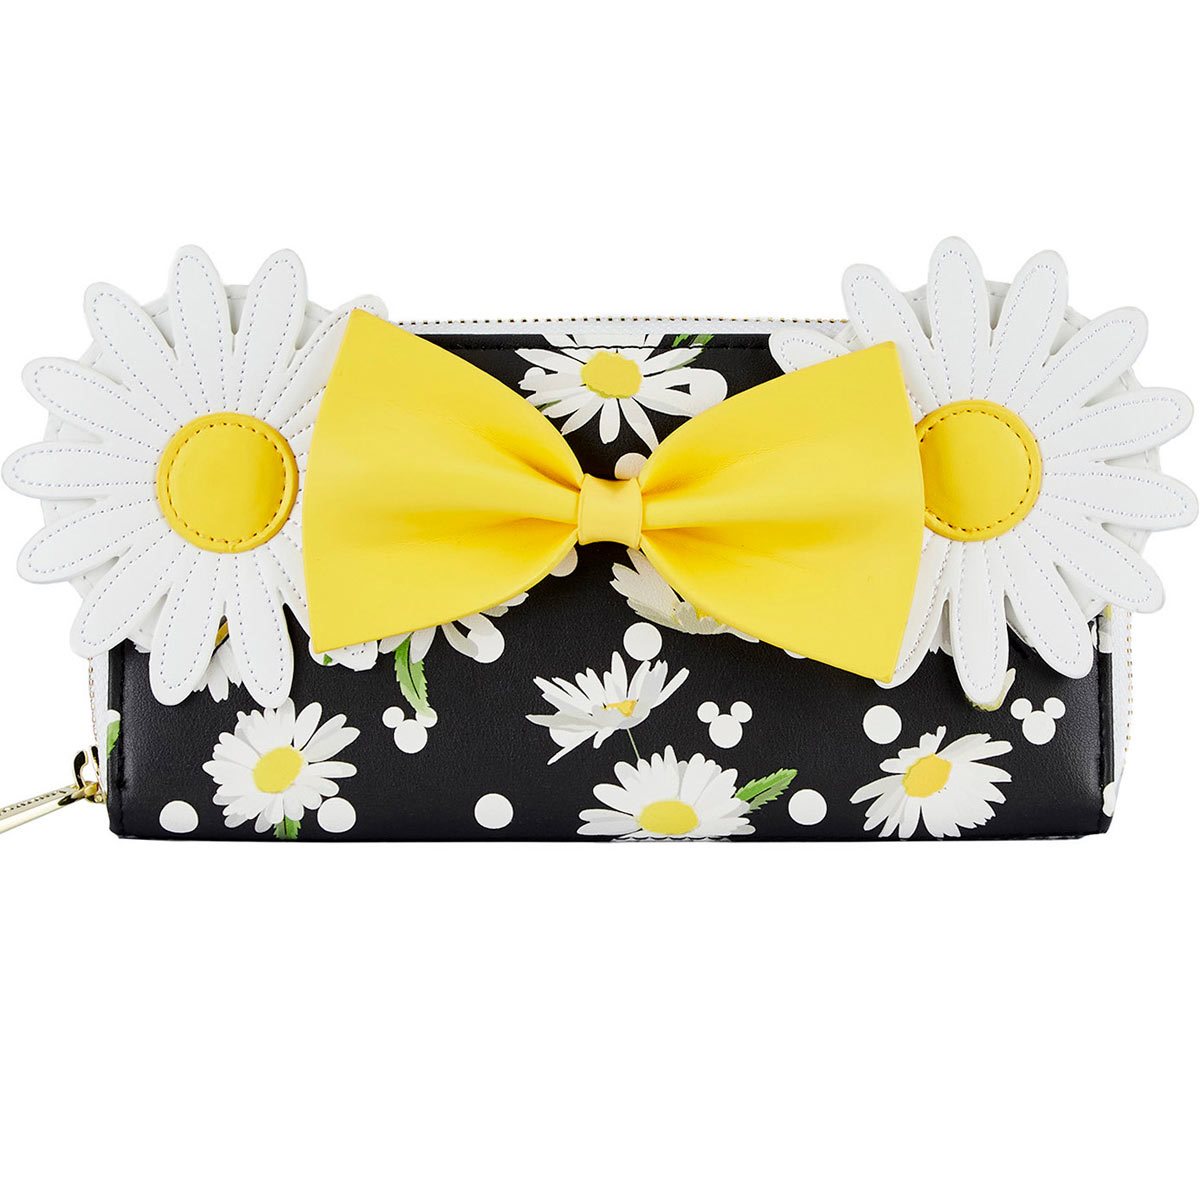 Minnie Mouse Floral Zip-Around Wallet - Entertainment Earth